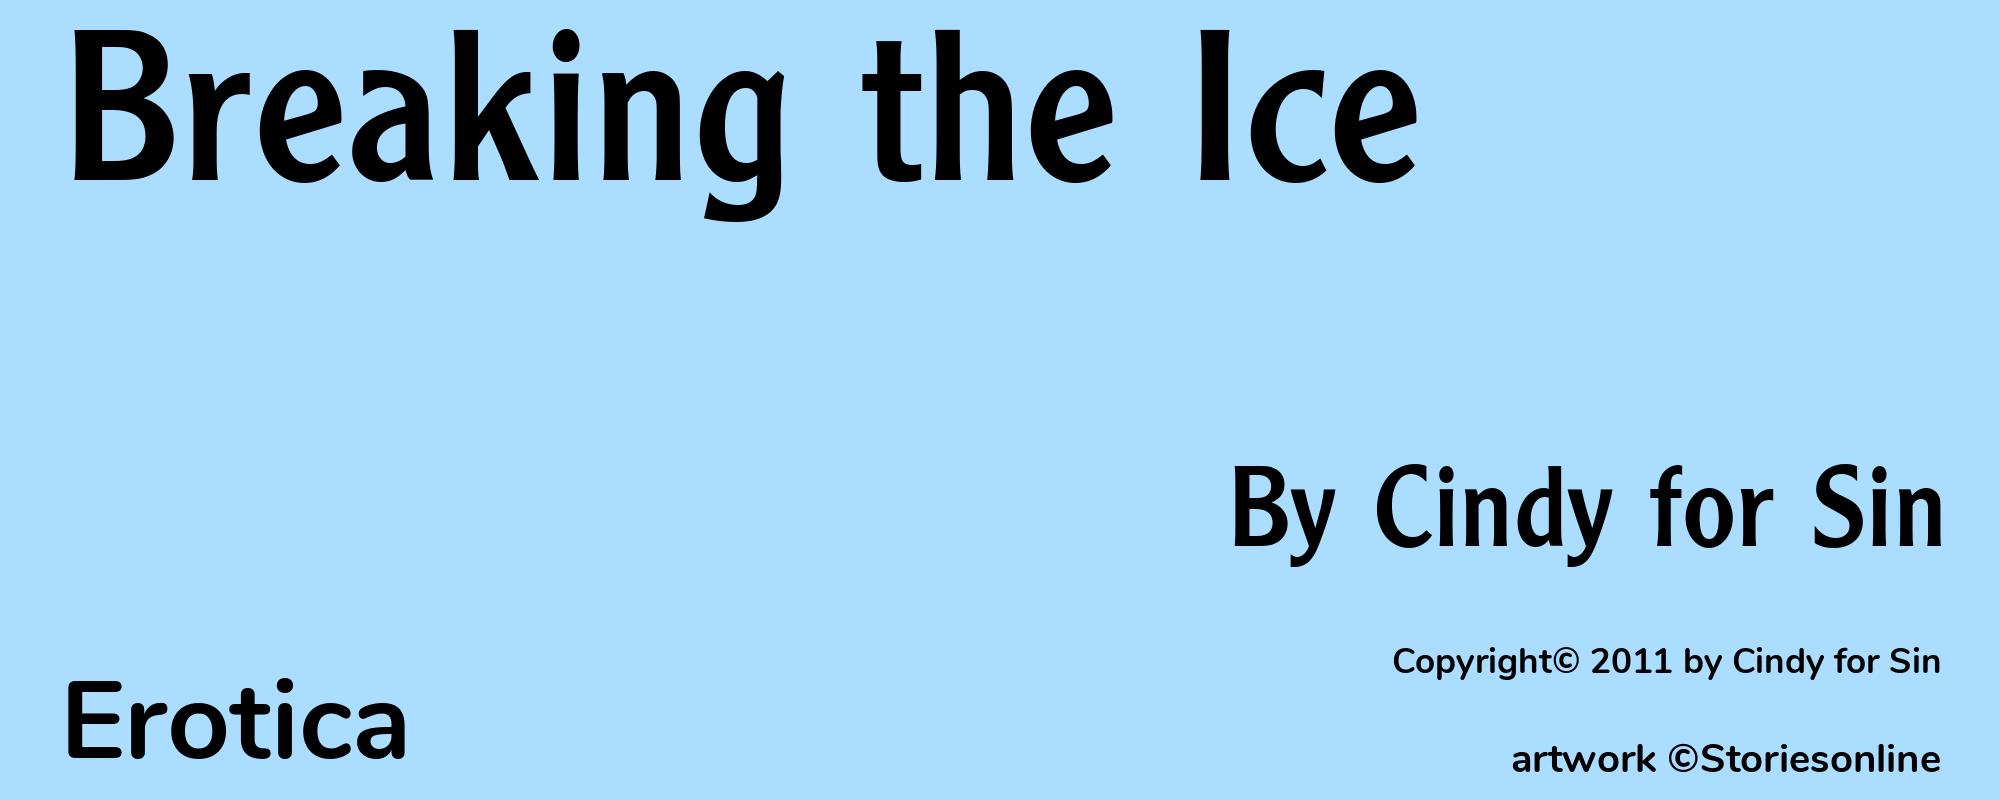 Breaking the Ice - Cover